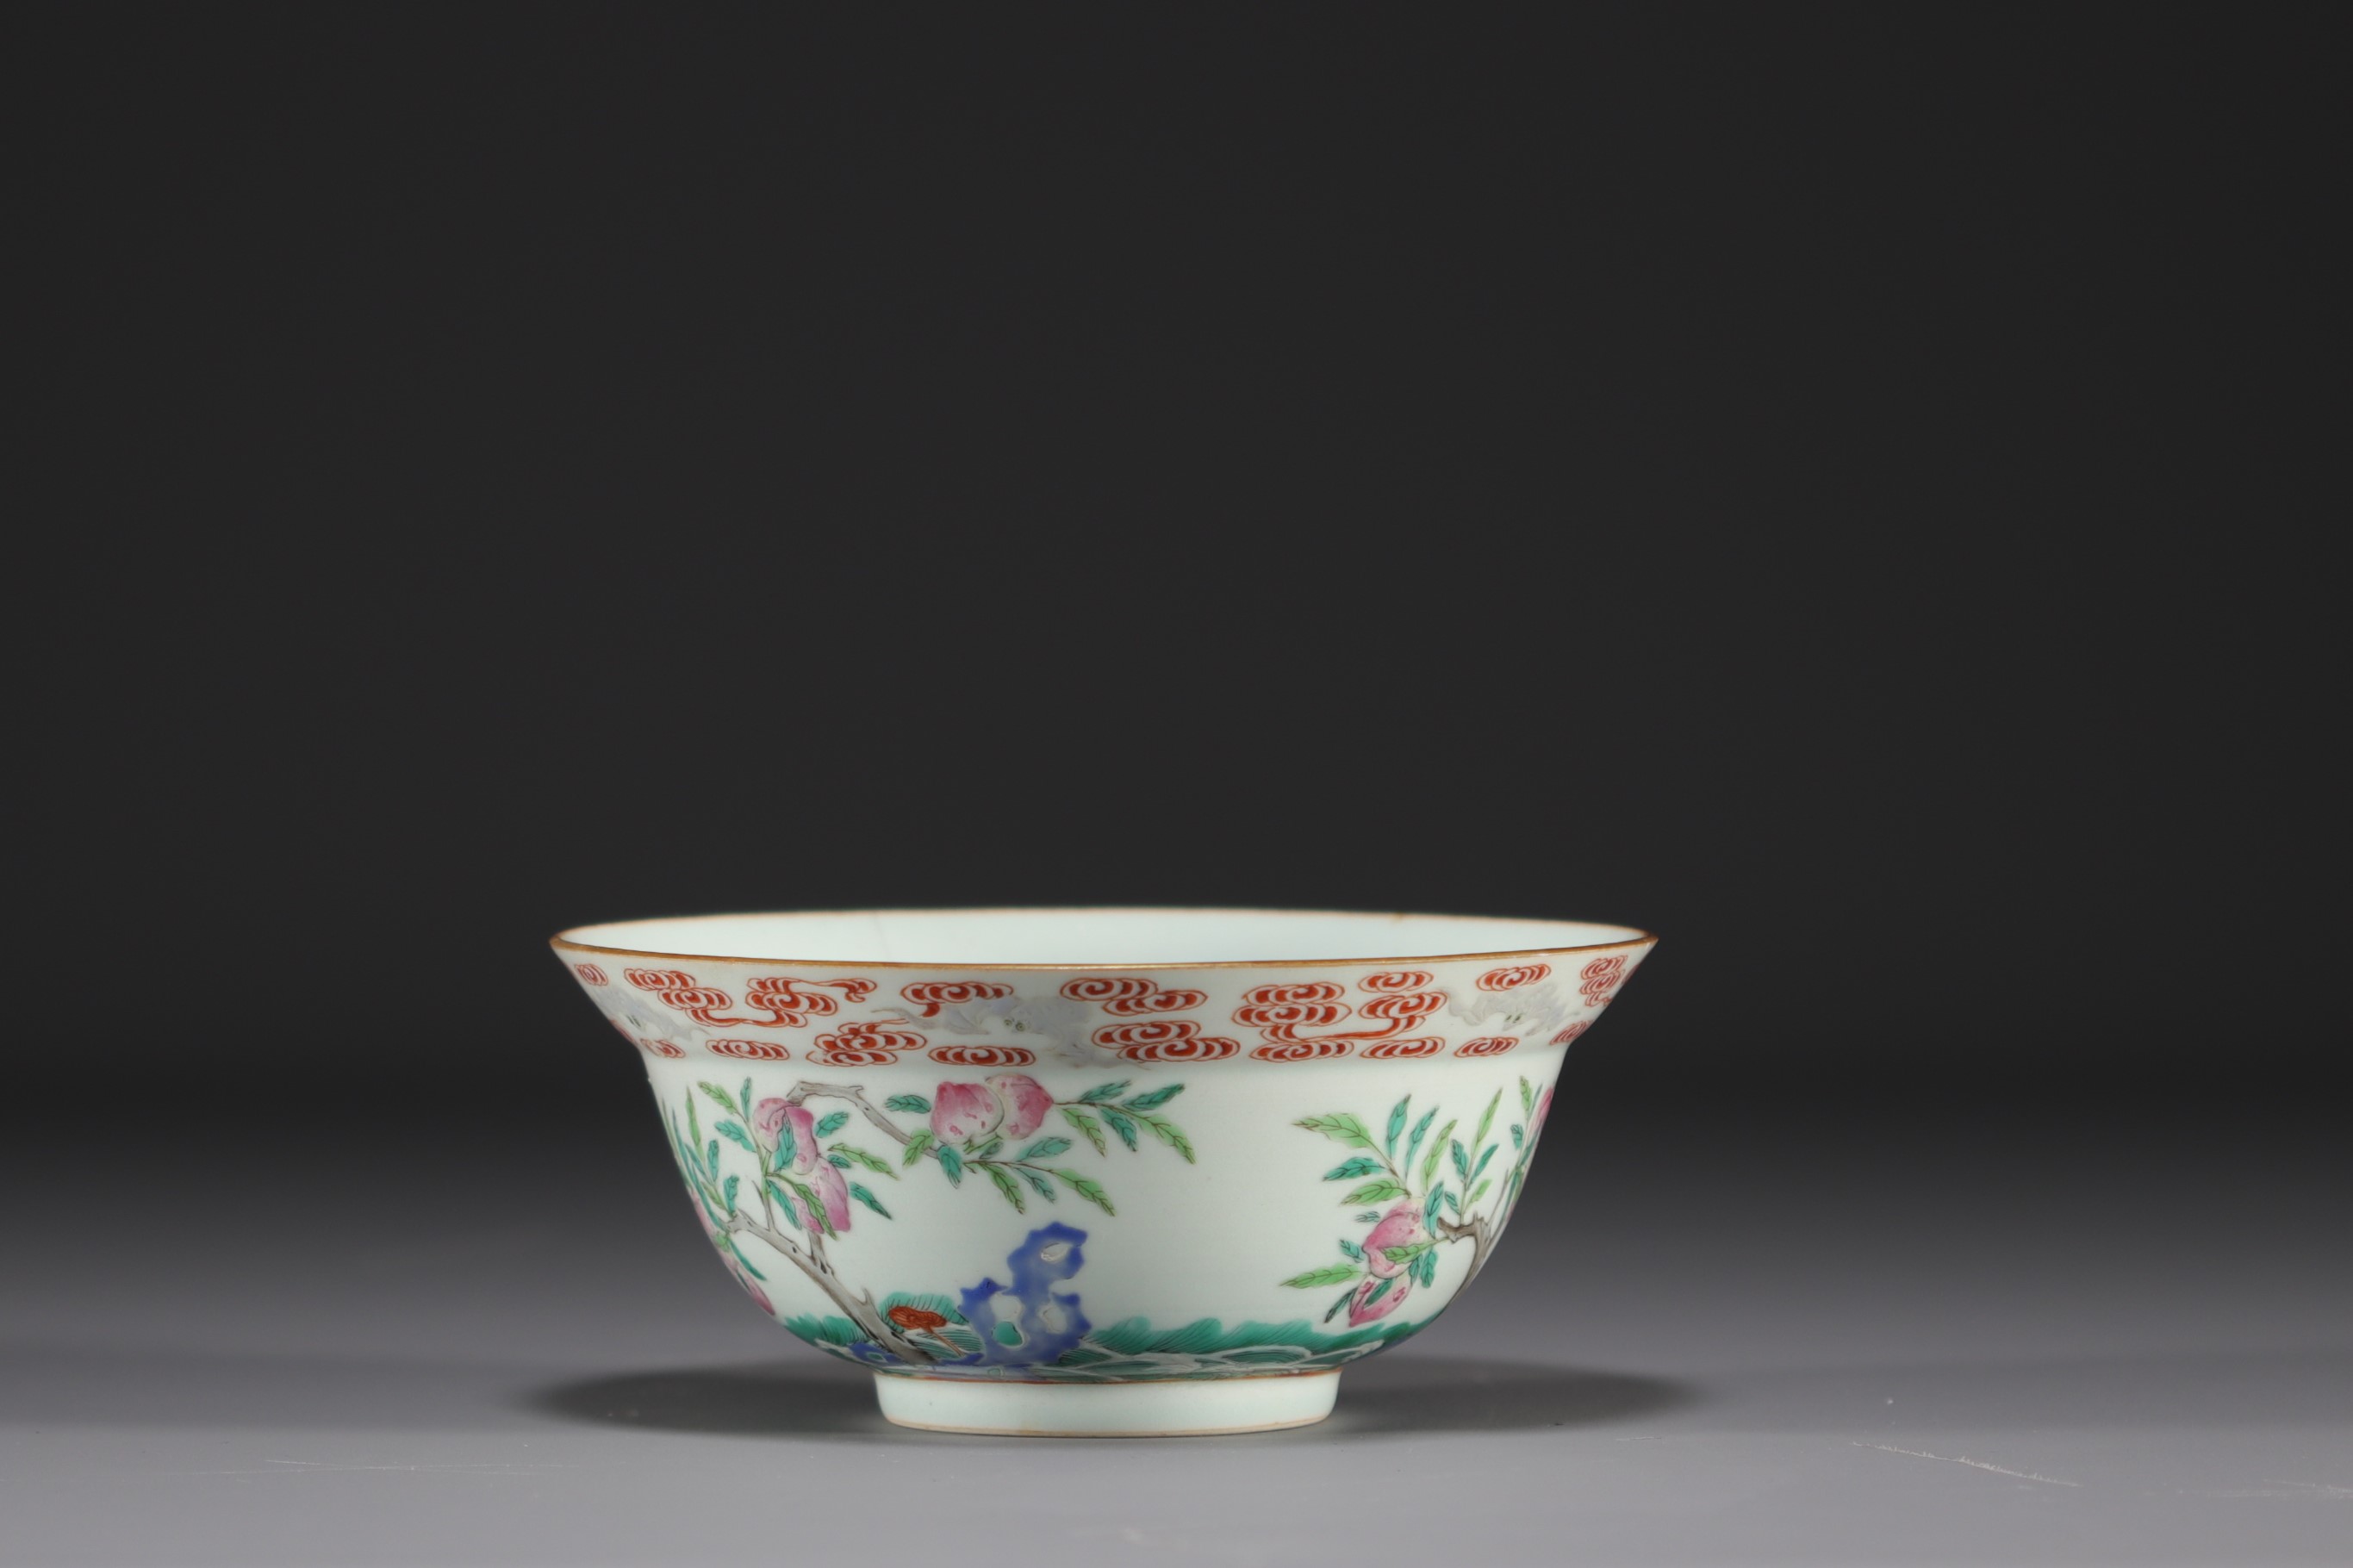 China - Porcelain bowl decorated with peaches and bats, Jiaqing period, late 18th / early 19th centu - Image 3 of 4